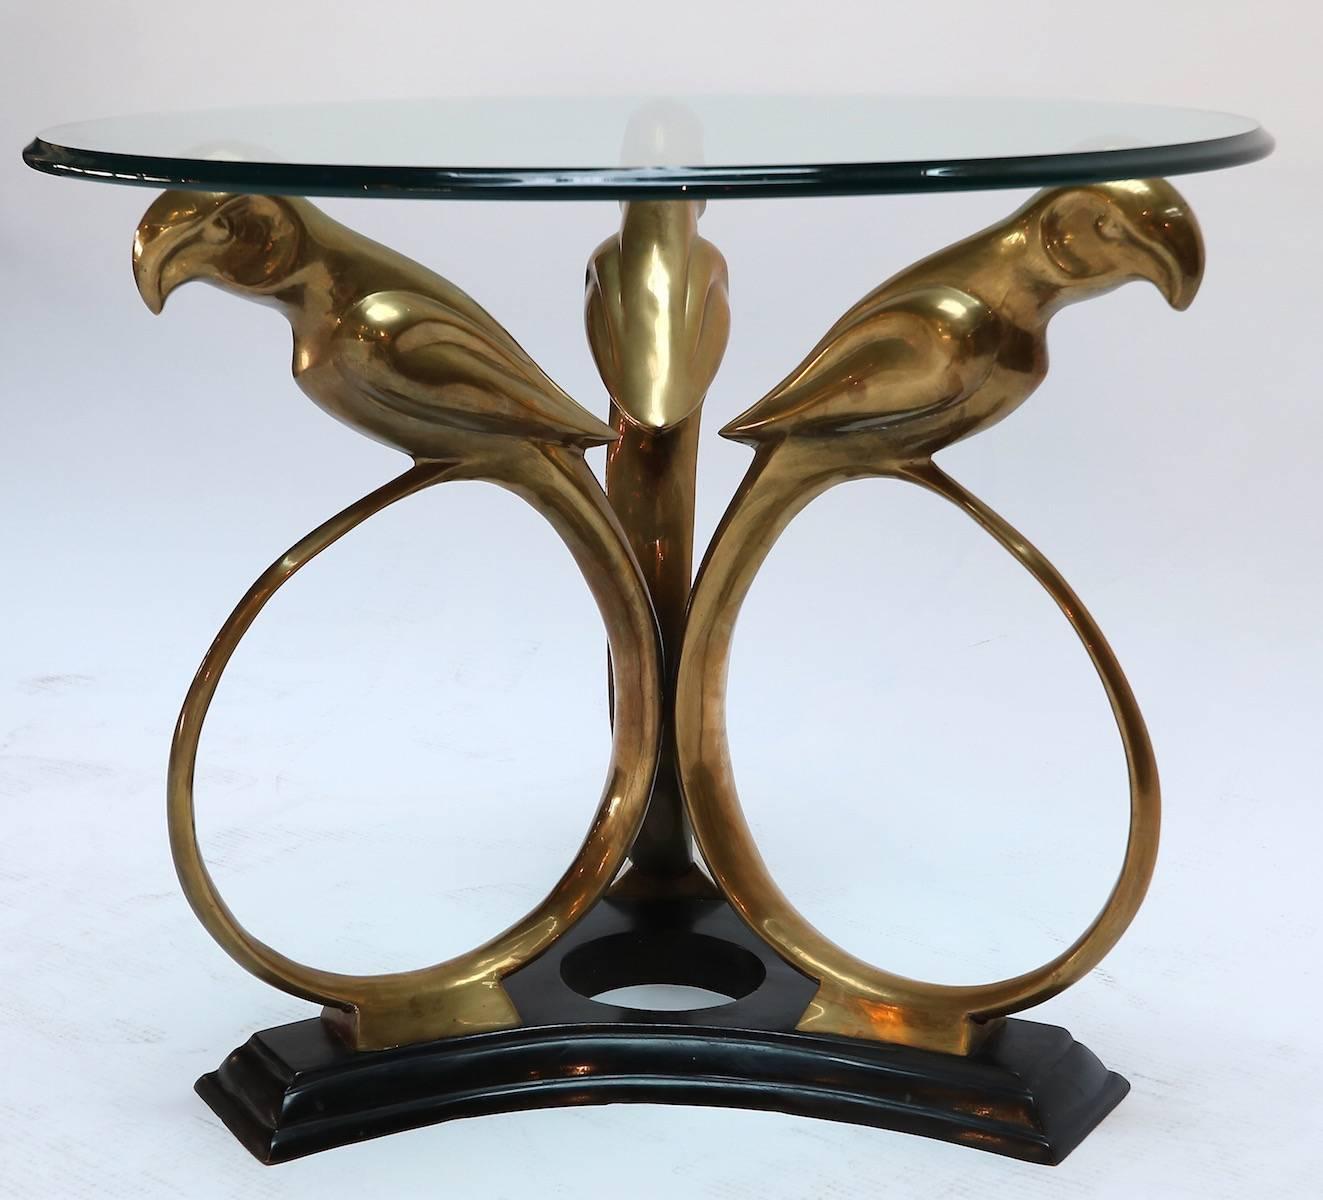 Brass and metal 1960s side table with parrot base and glass top.